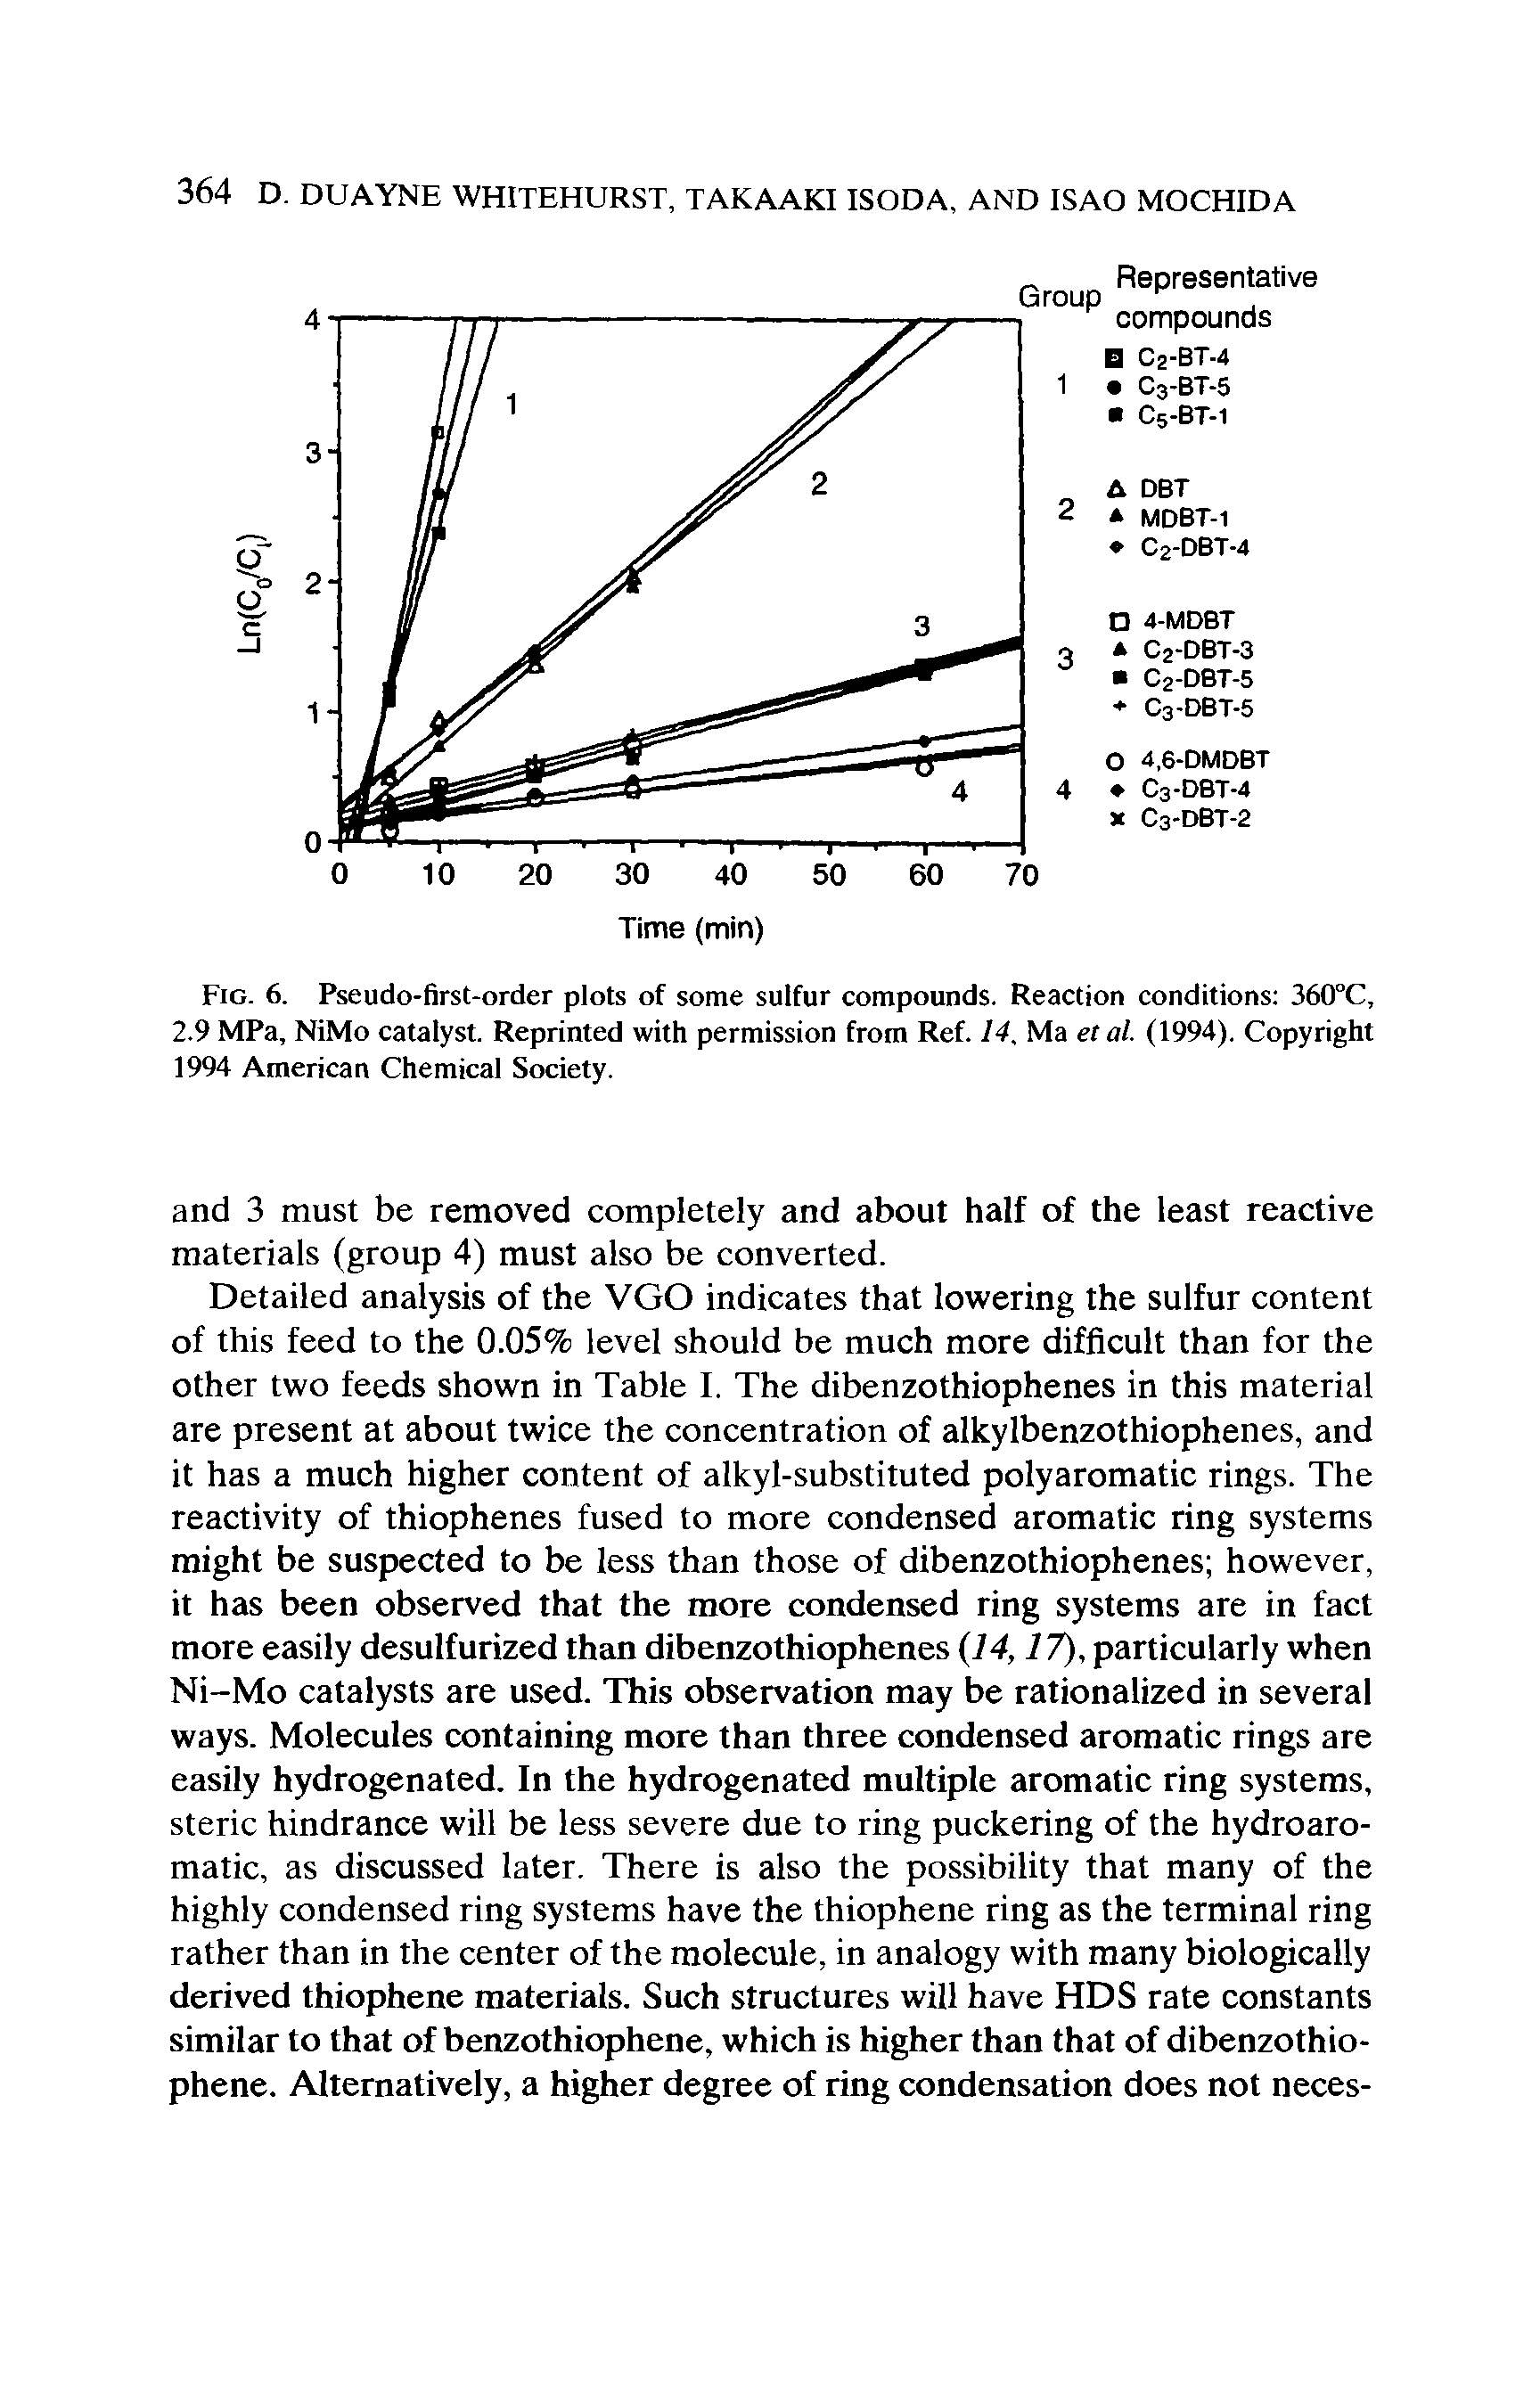 Fig. 6. Pseudo-first-order plots of some sulfur compounds. Reaction conditions 360°C, 2.9 MPa, NiMo catalyst. Reprinted with permission from Ref. 14, Ma etal. (1994). Copyright 1994 American Chemical Society.